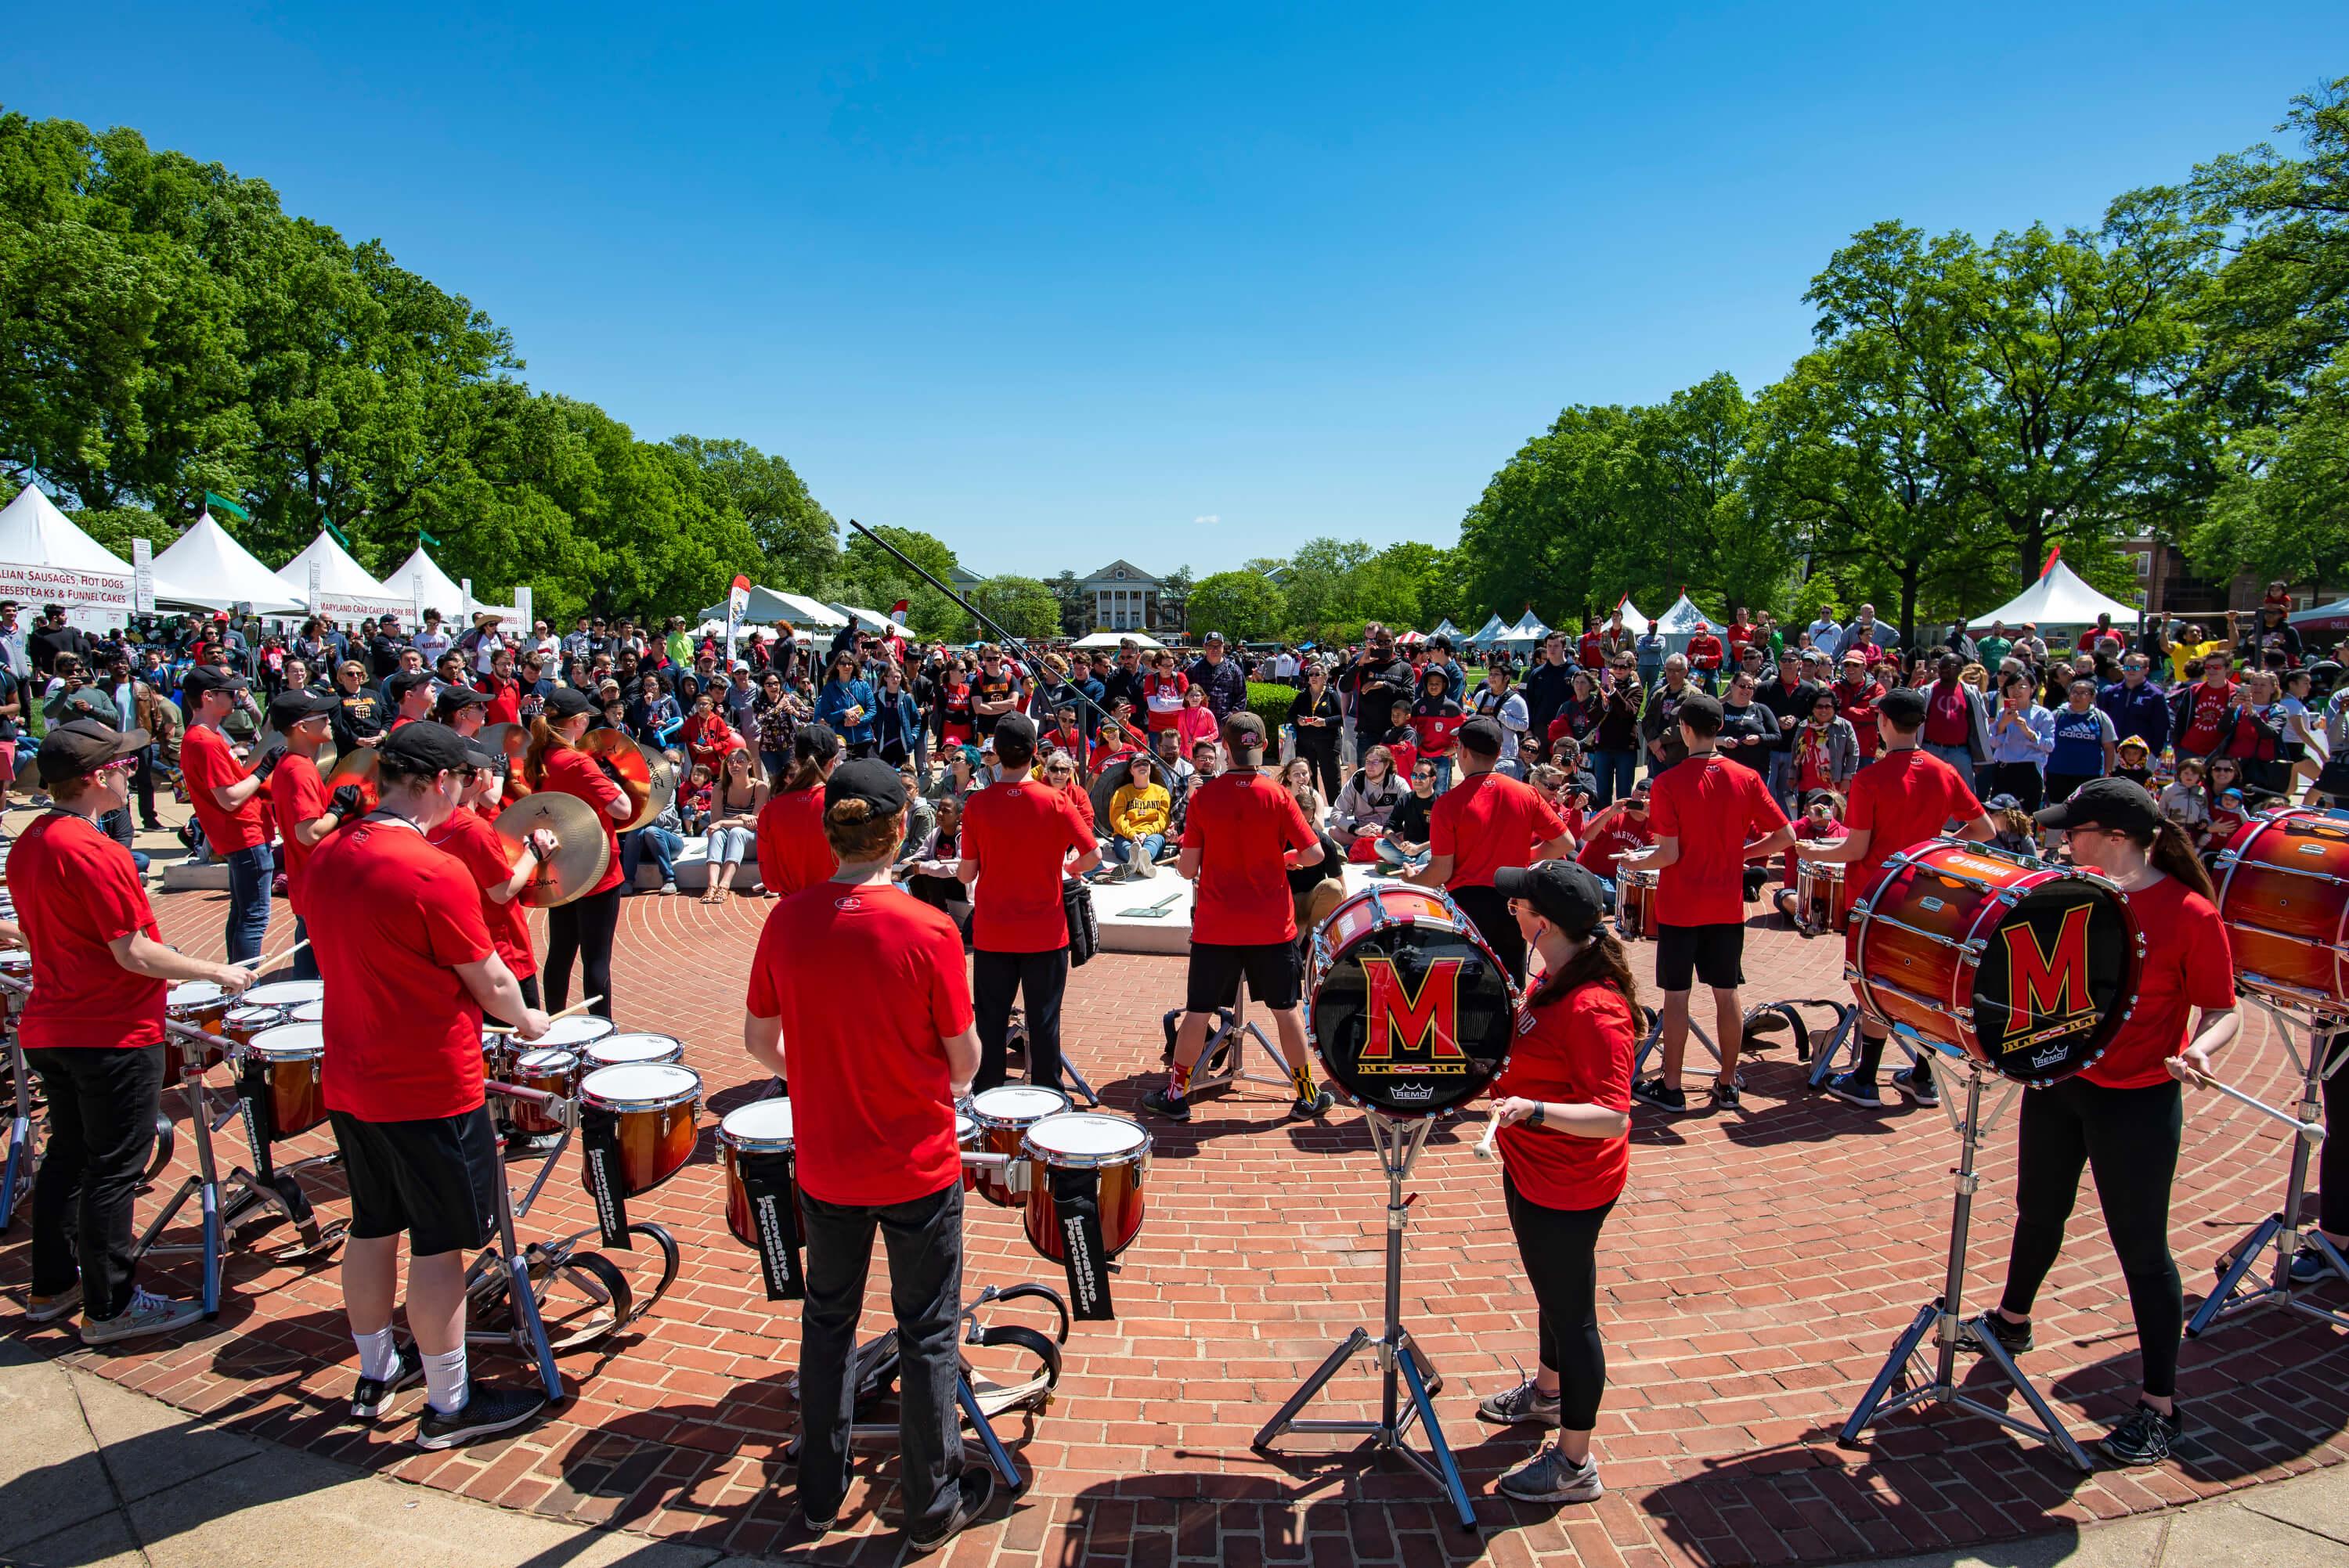 University band playing to crowd on campus during Maryland day